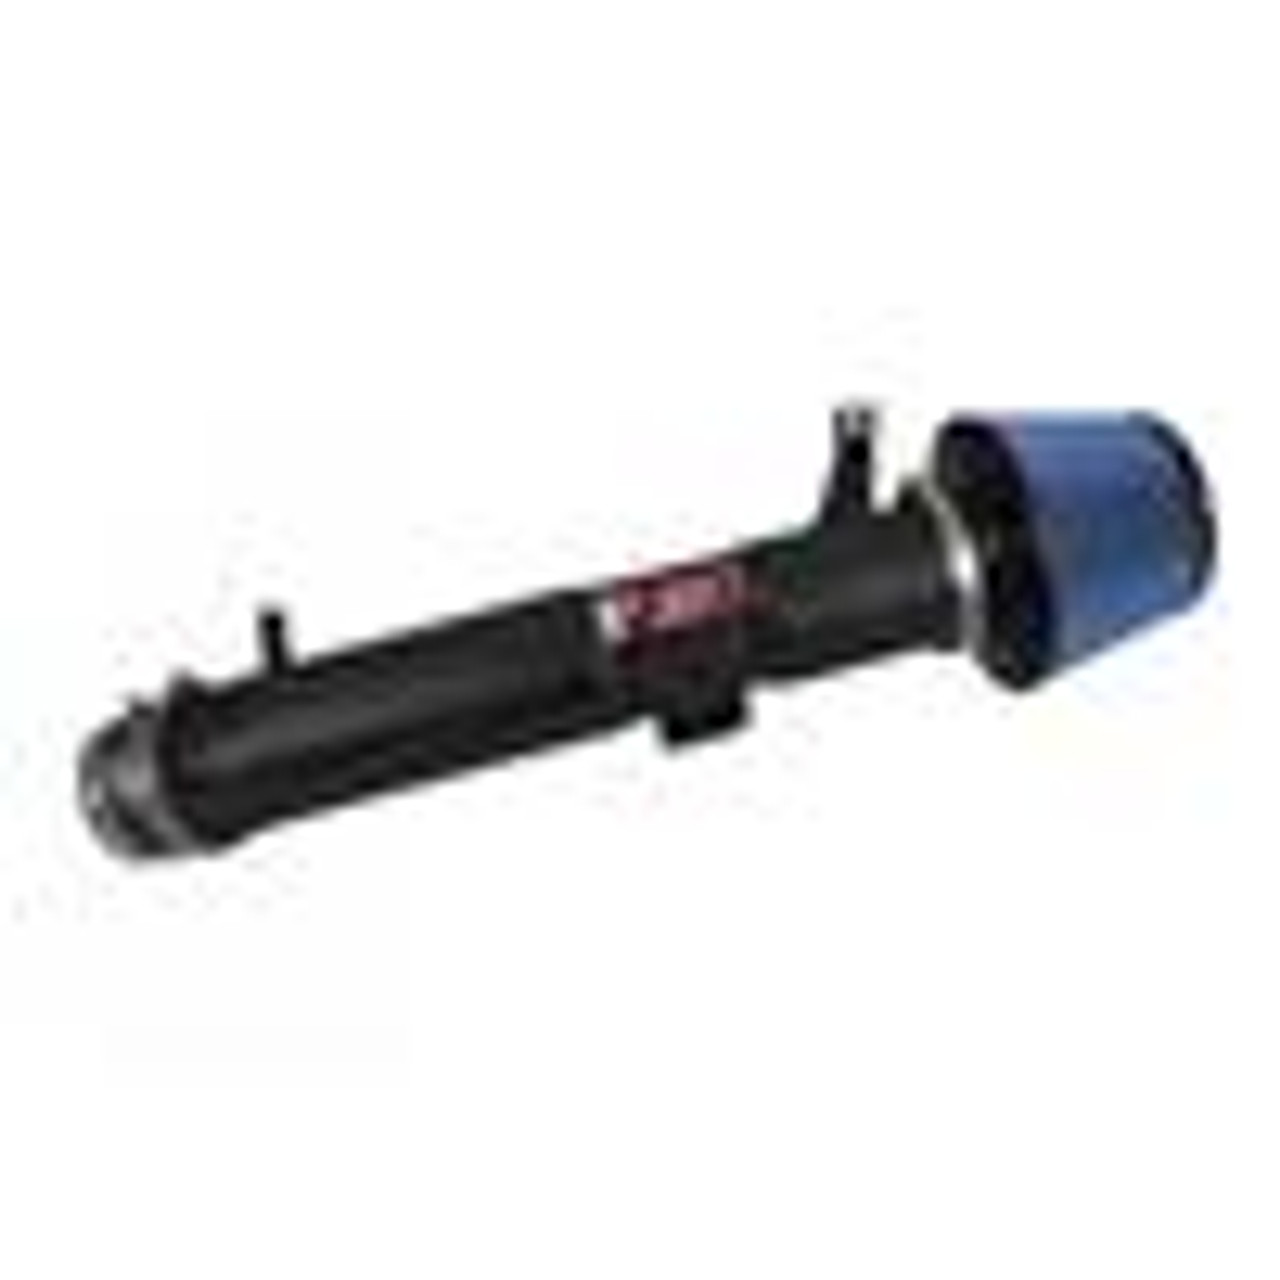 FORD POWER-FLOW AIR INTAKE SYSTEMS
Color: Wrinkle Black.  Intake Color: Wrinkle Black.  Filter Color: Blue